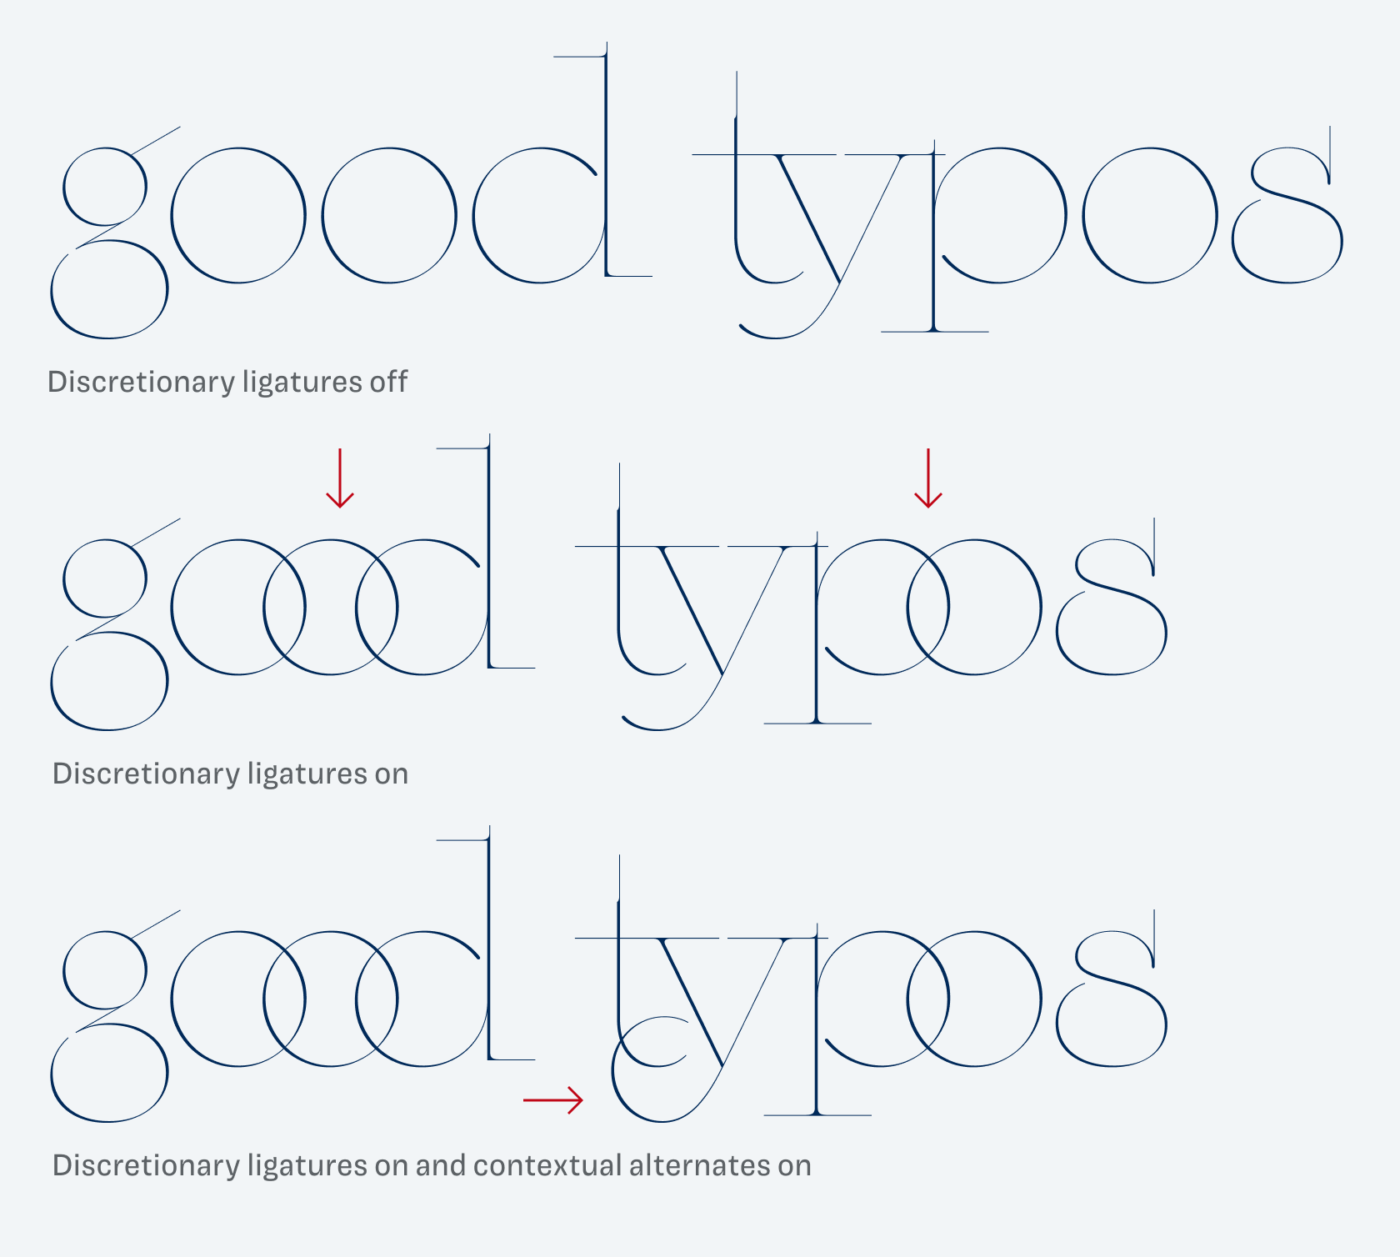 good  typos set with and without discreationary ligatures and contextual alternates.